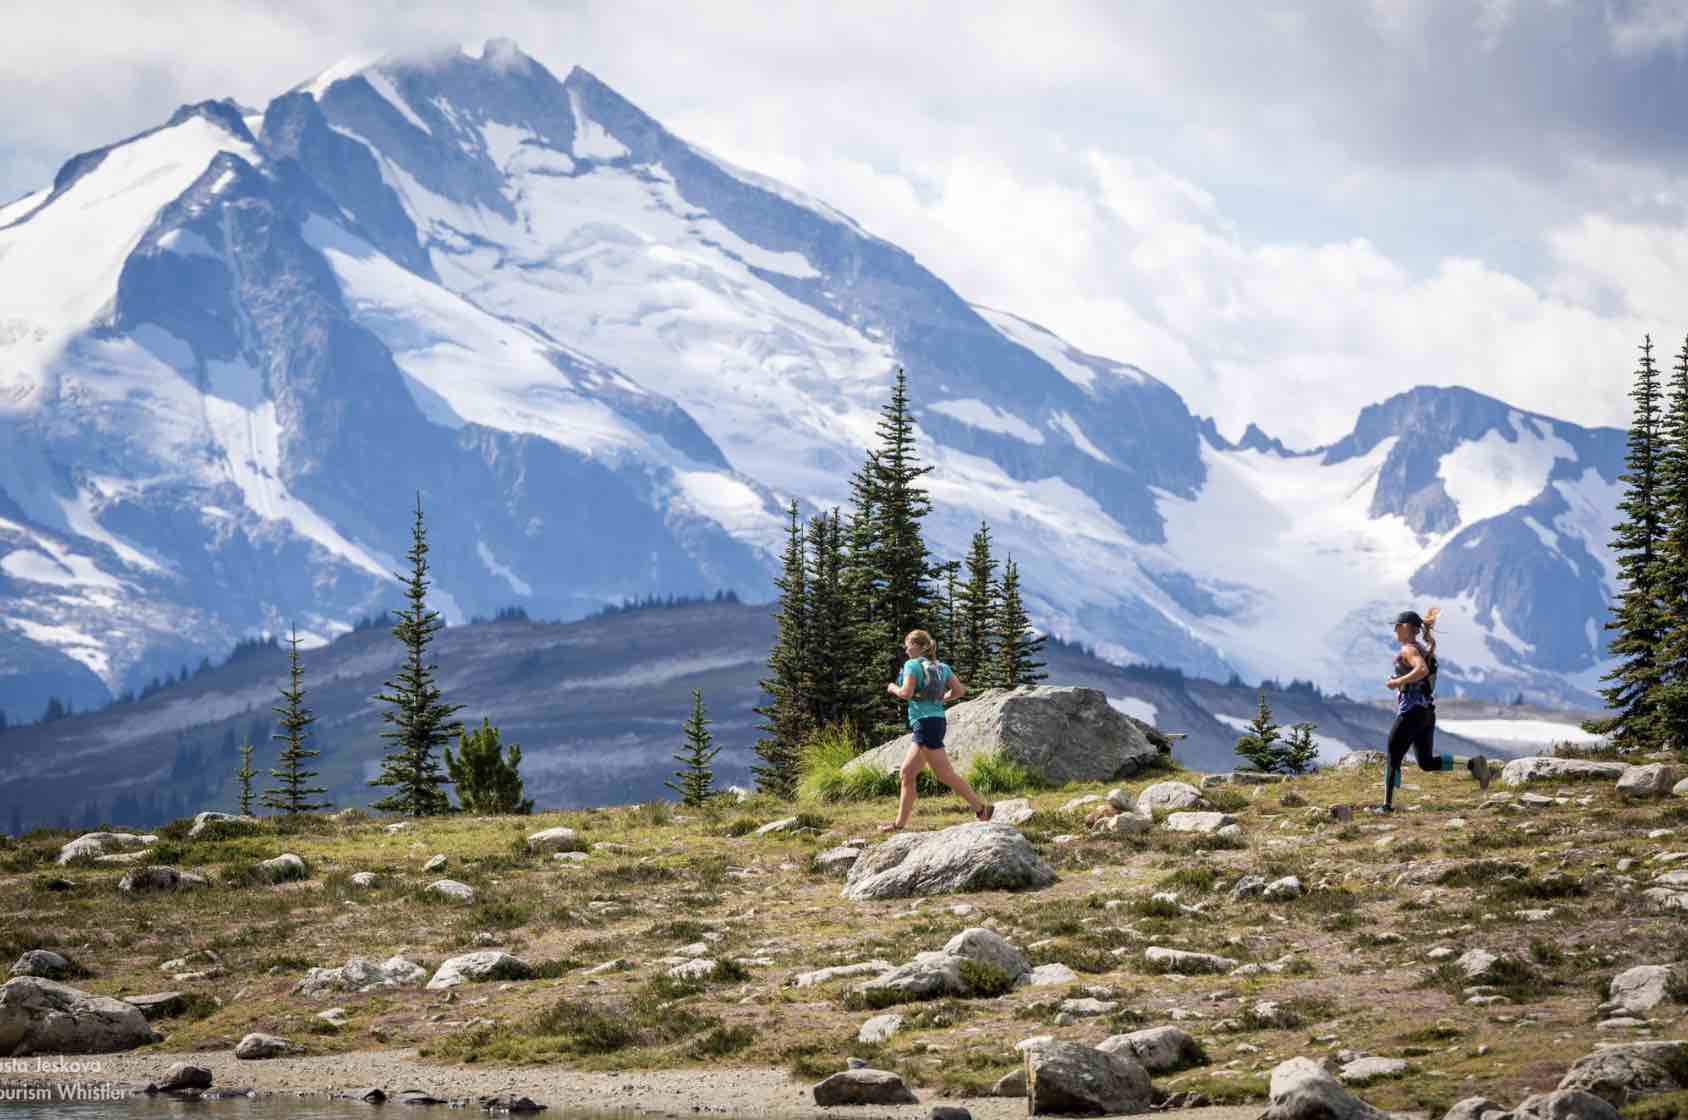 Whistler to get Canada’s first UTMB race in 2024